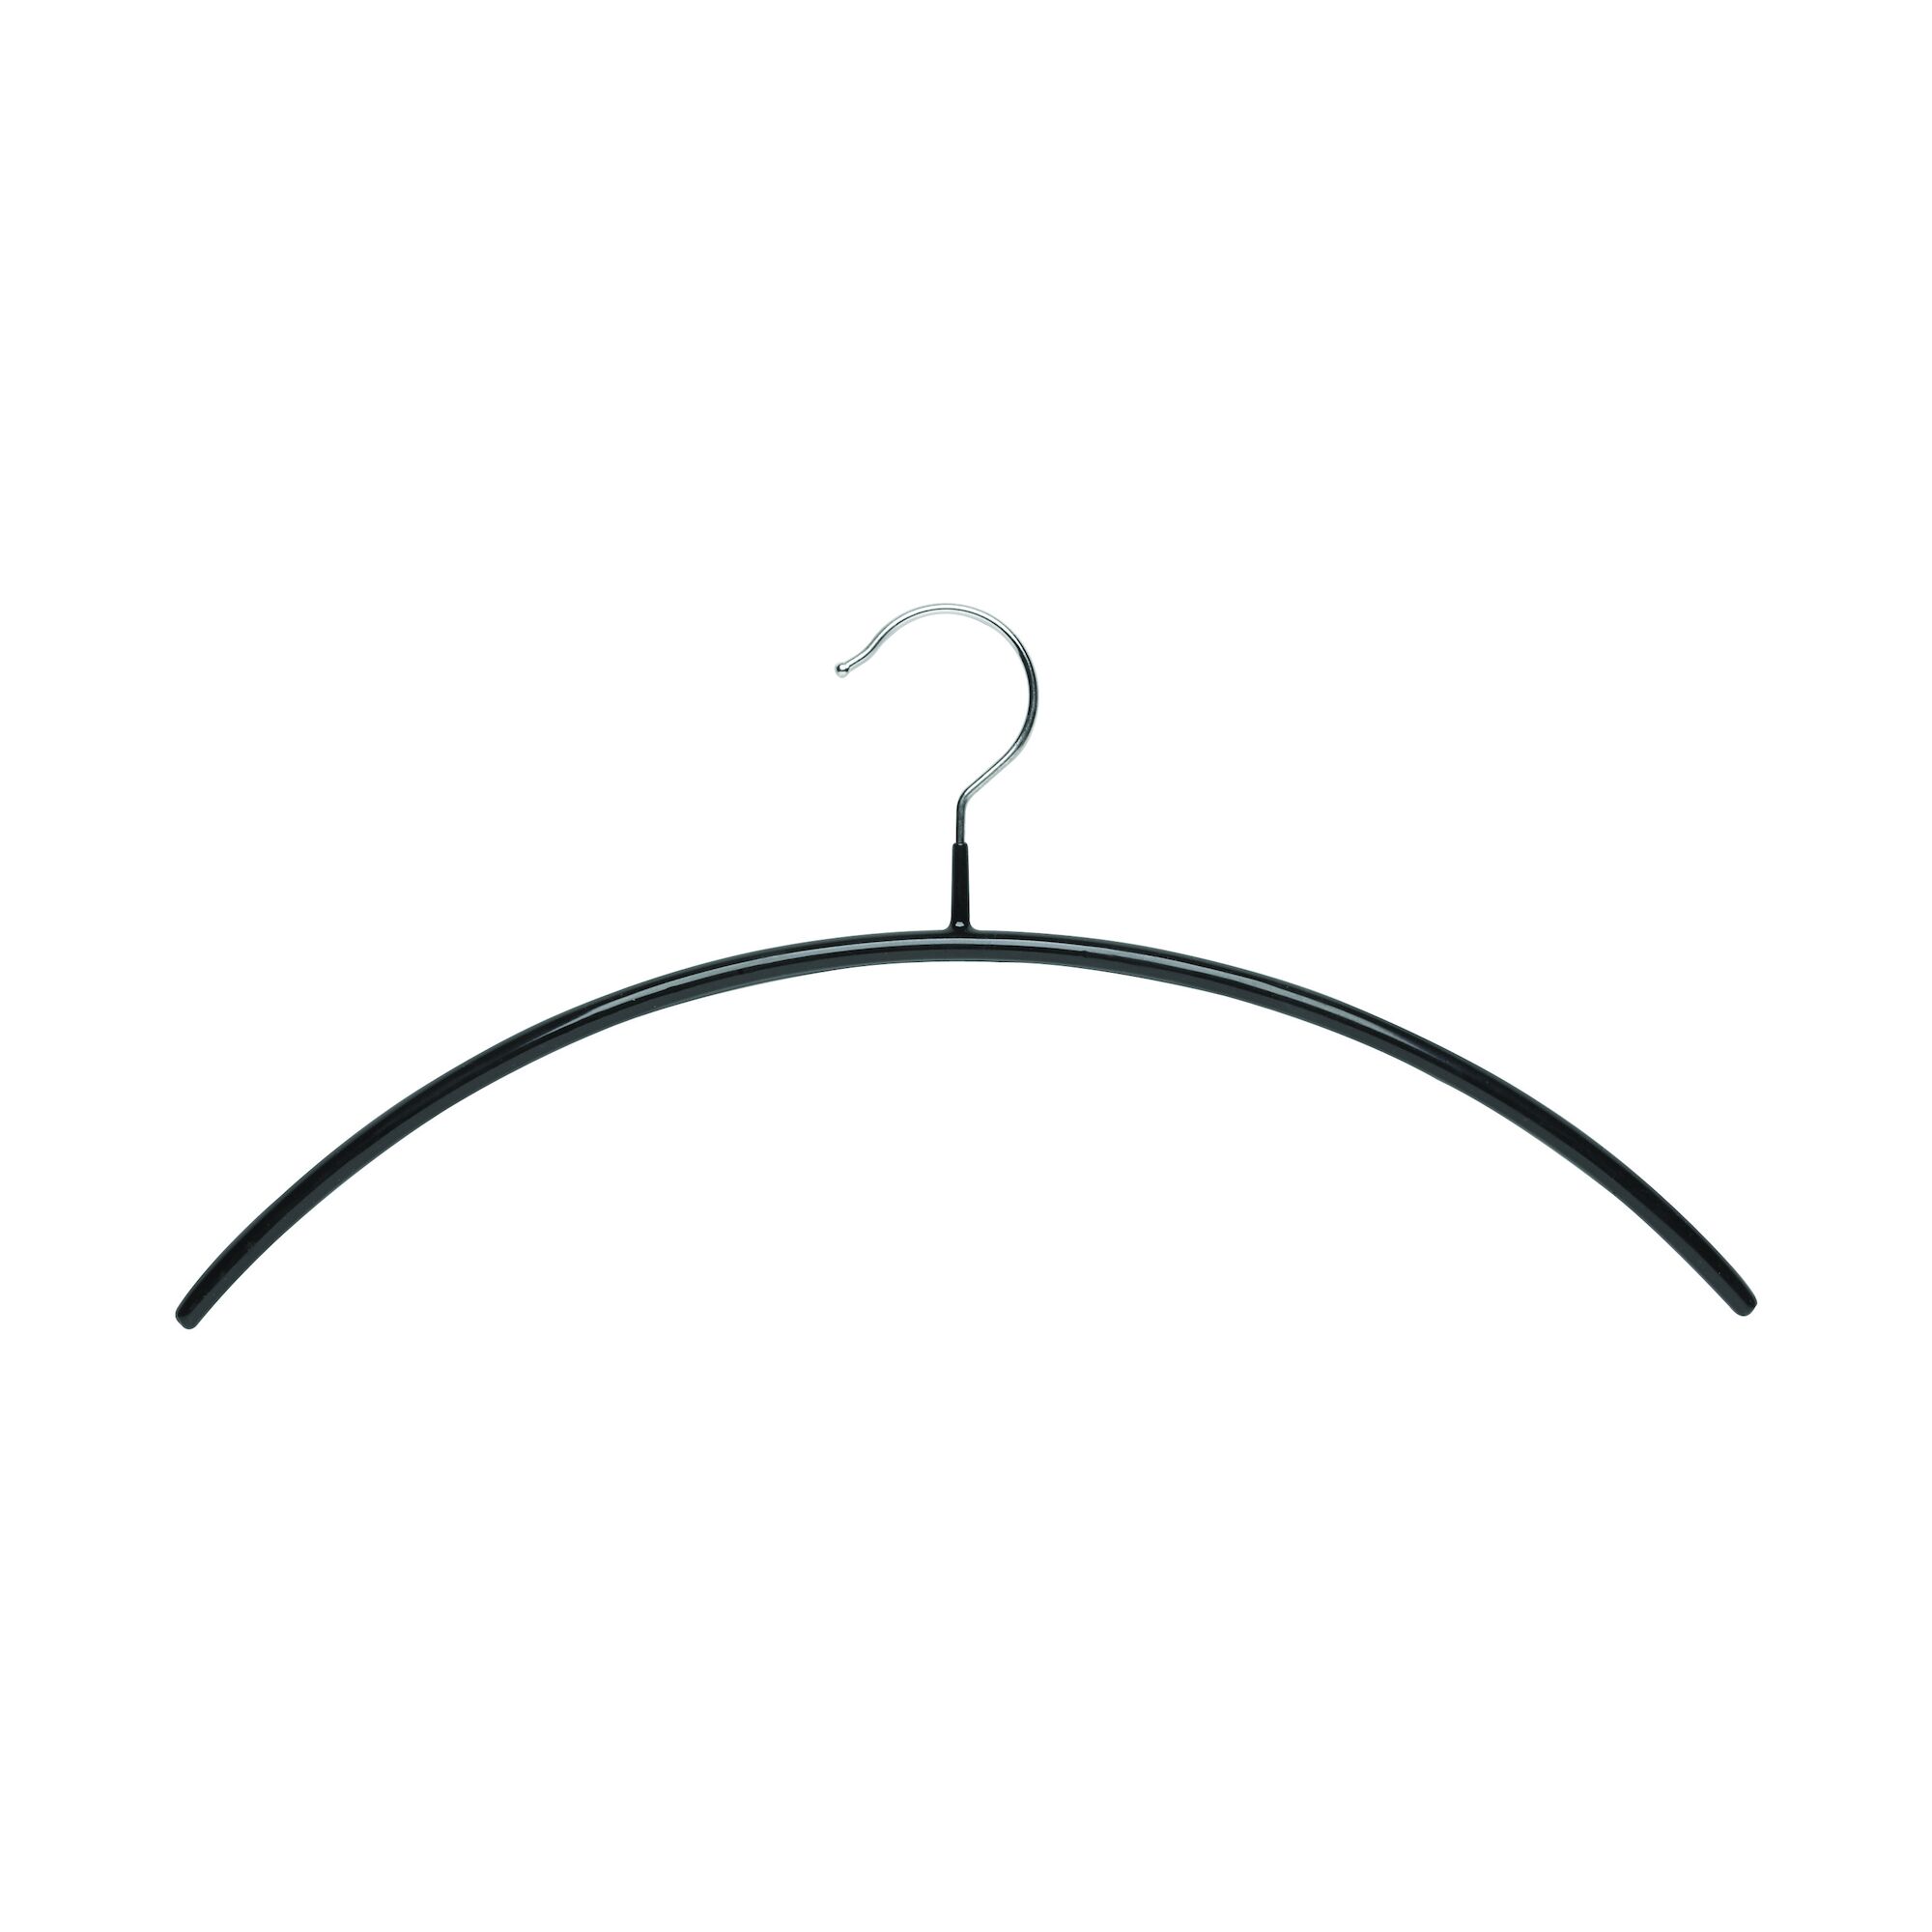 Knitwear Clothes Hangers